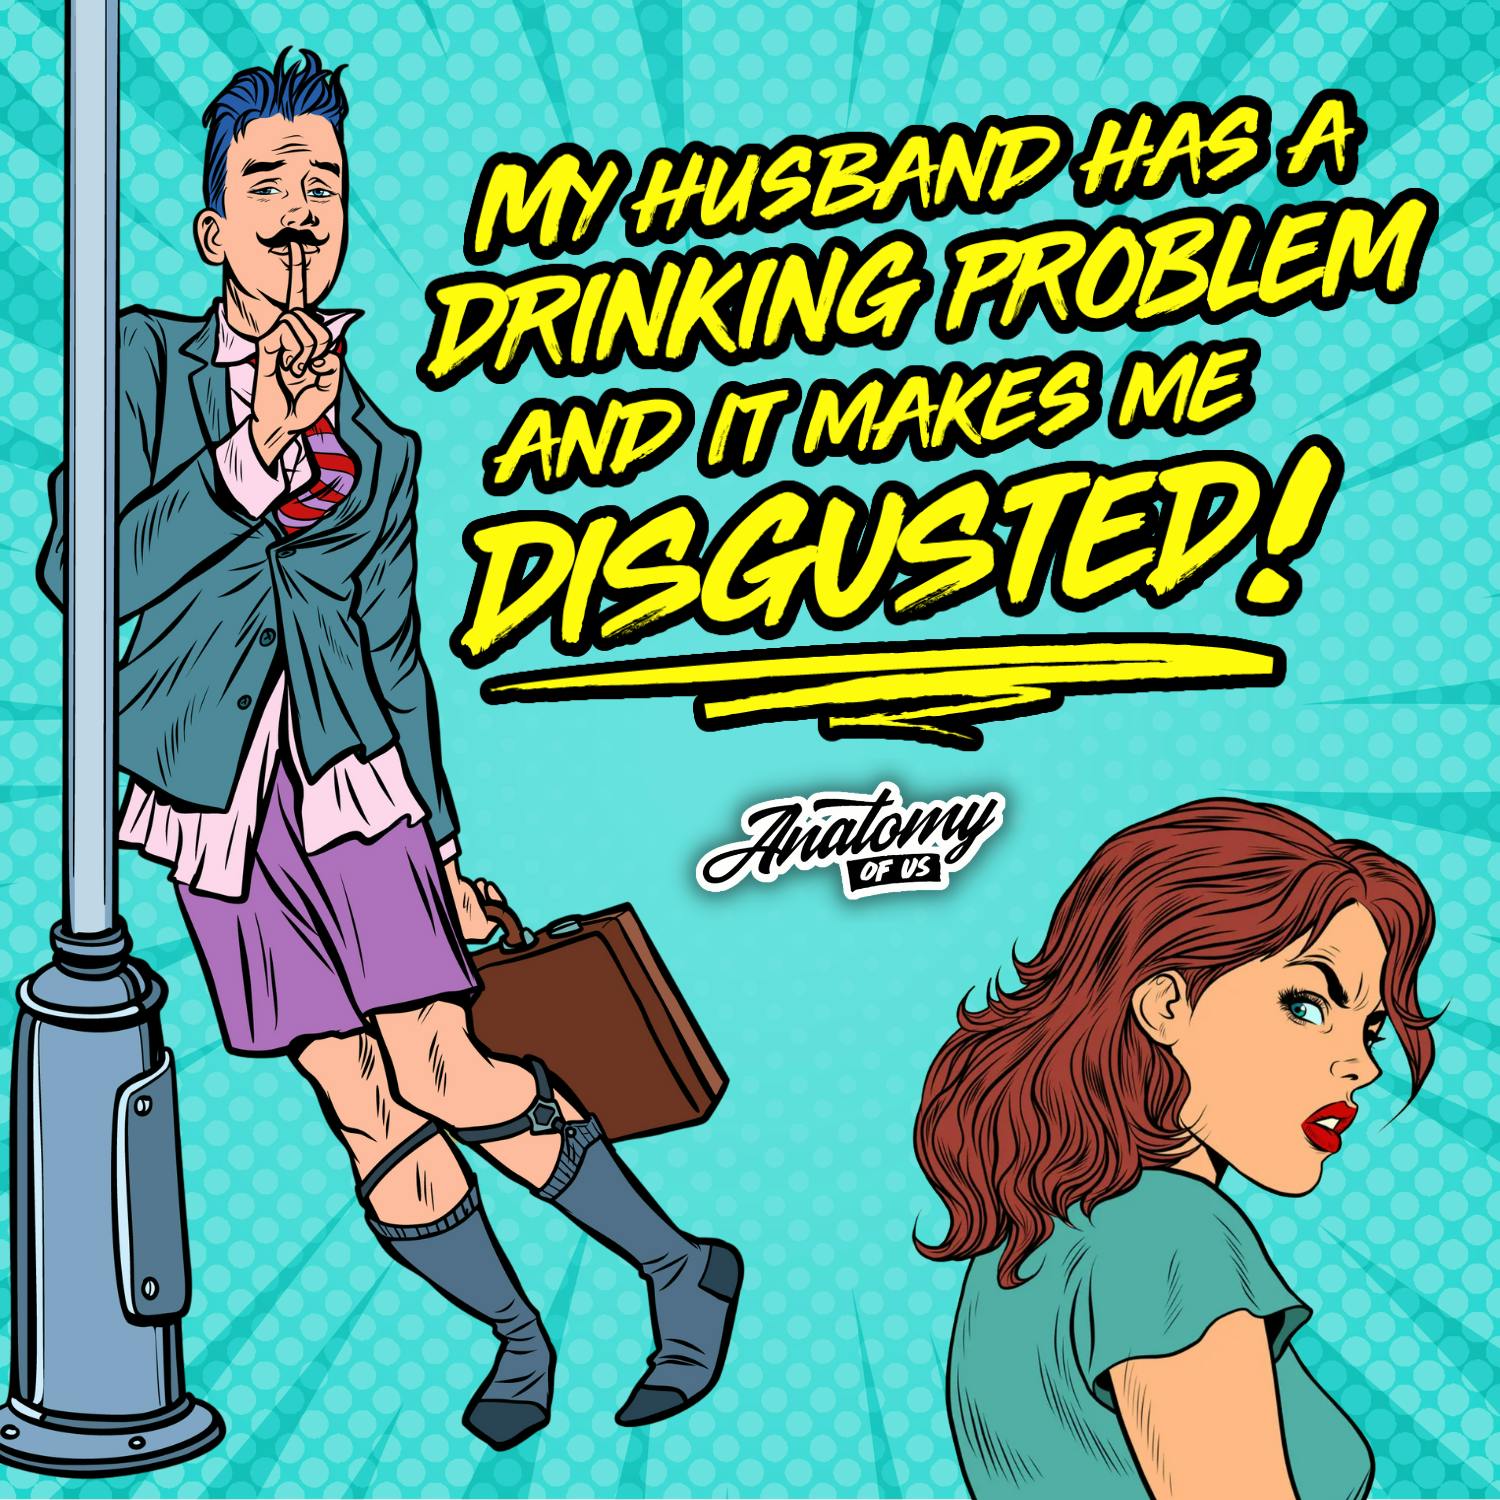 My Husband has a Drinking Problem and it Makes me Disgusted!